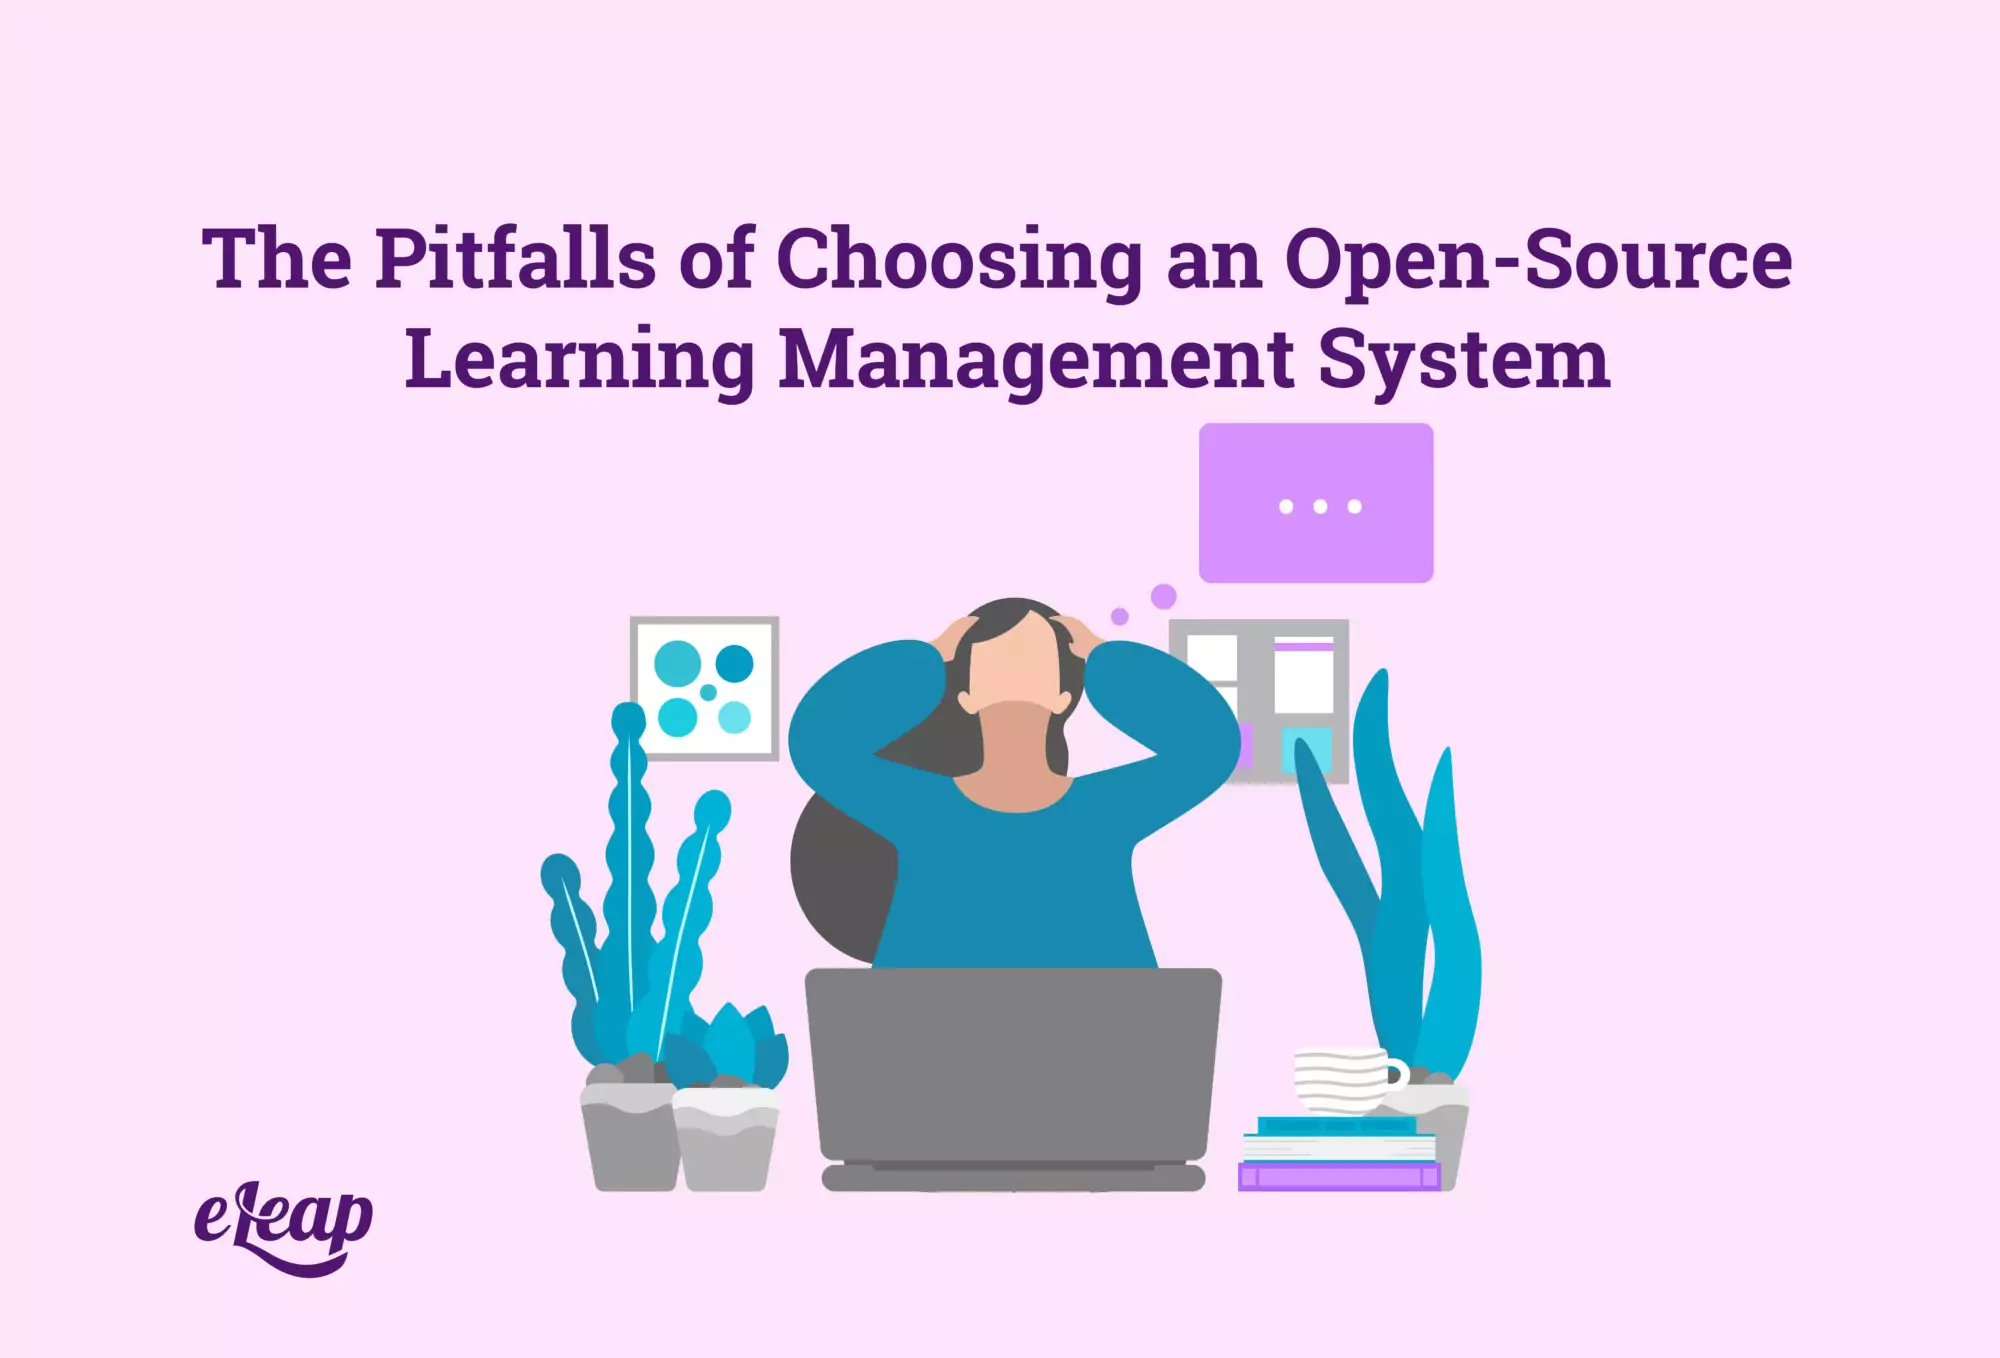 The Pitfalls of Choosing an Open-Source Learning Management System